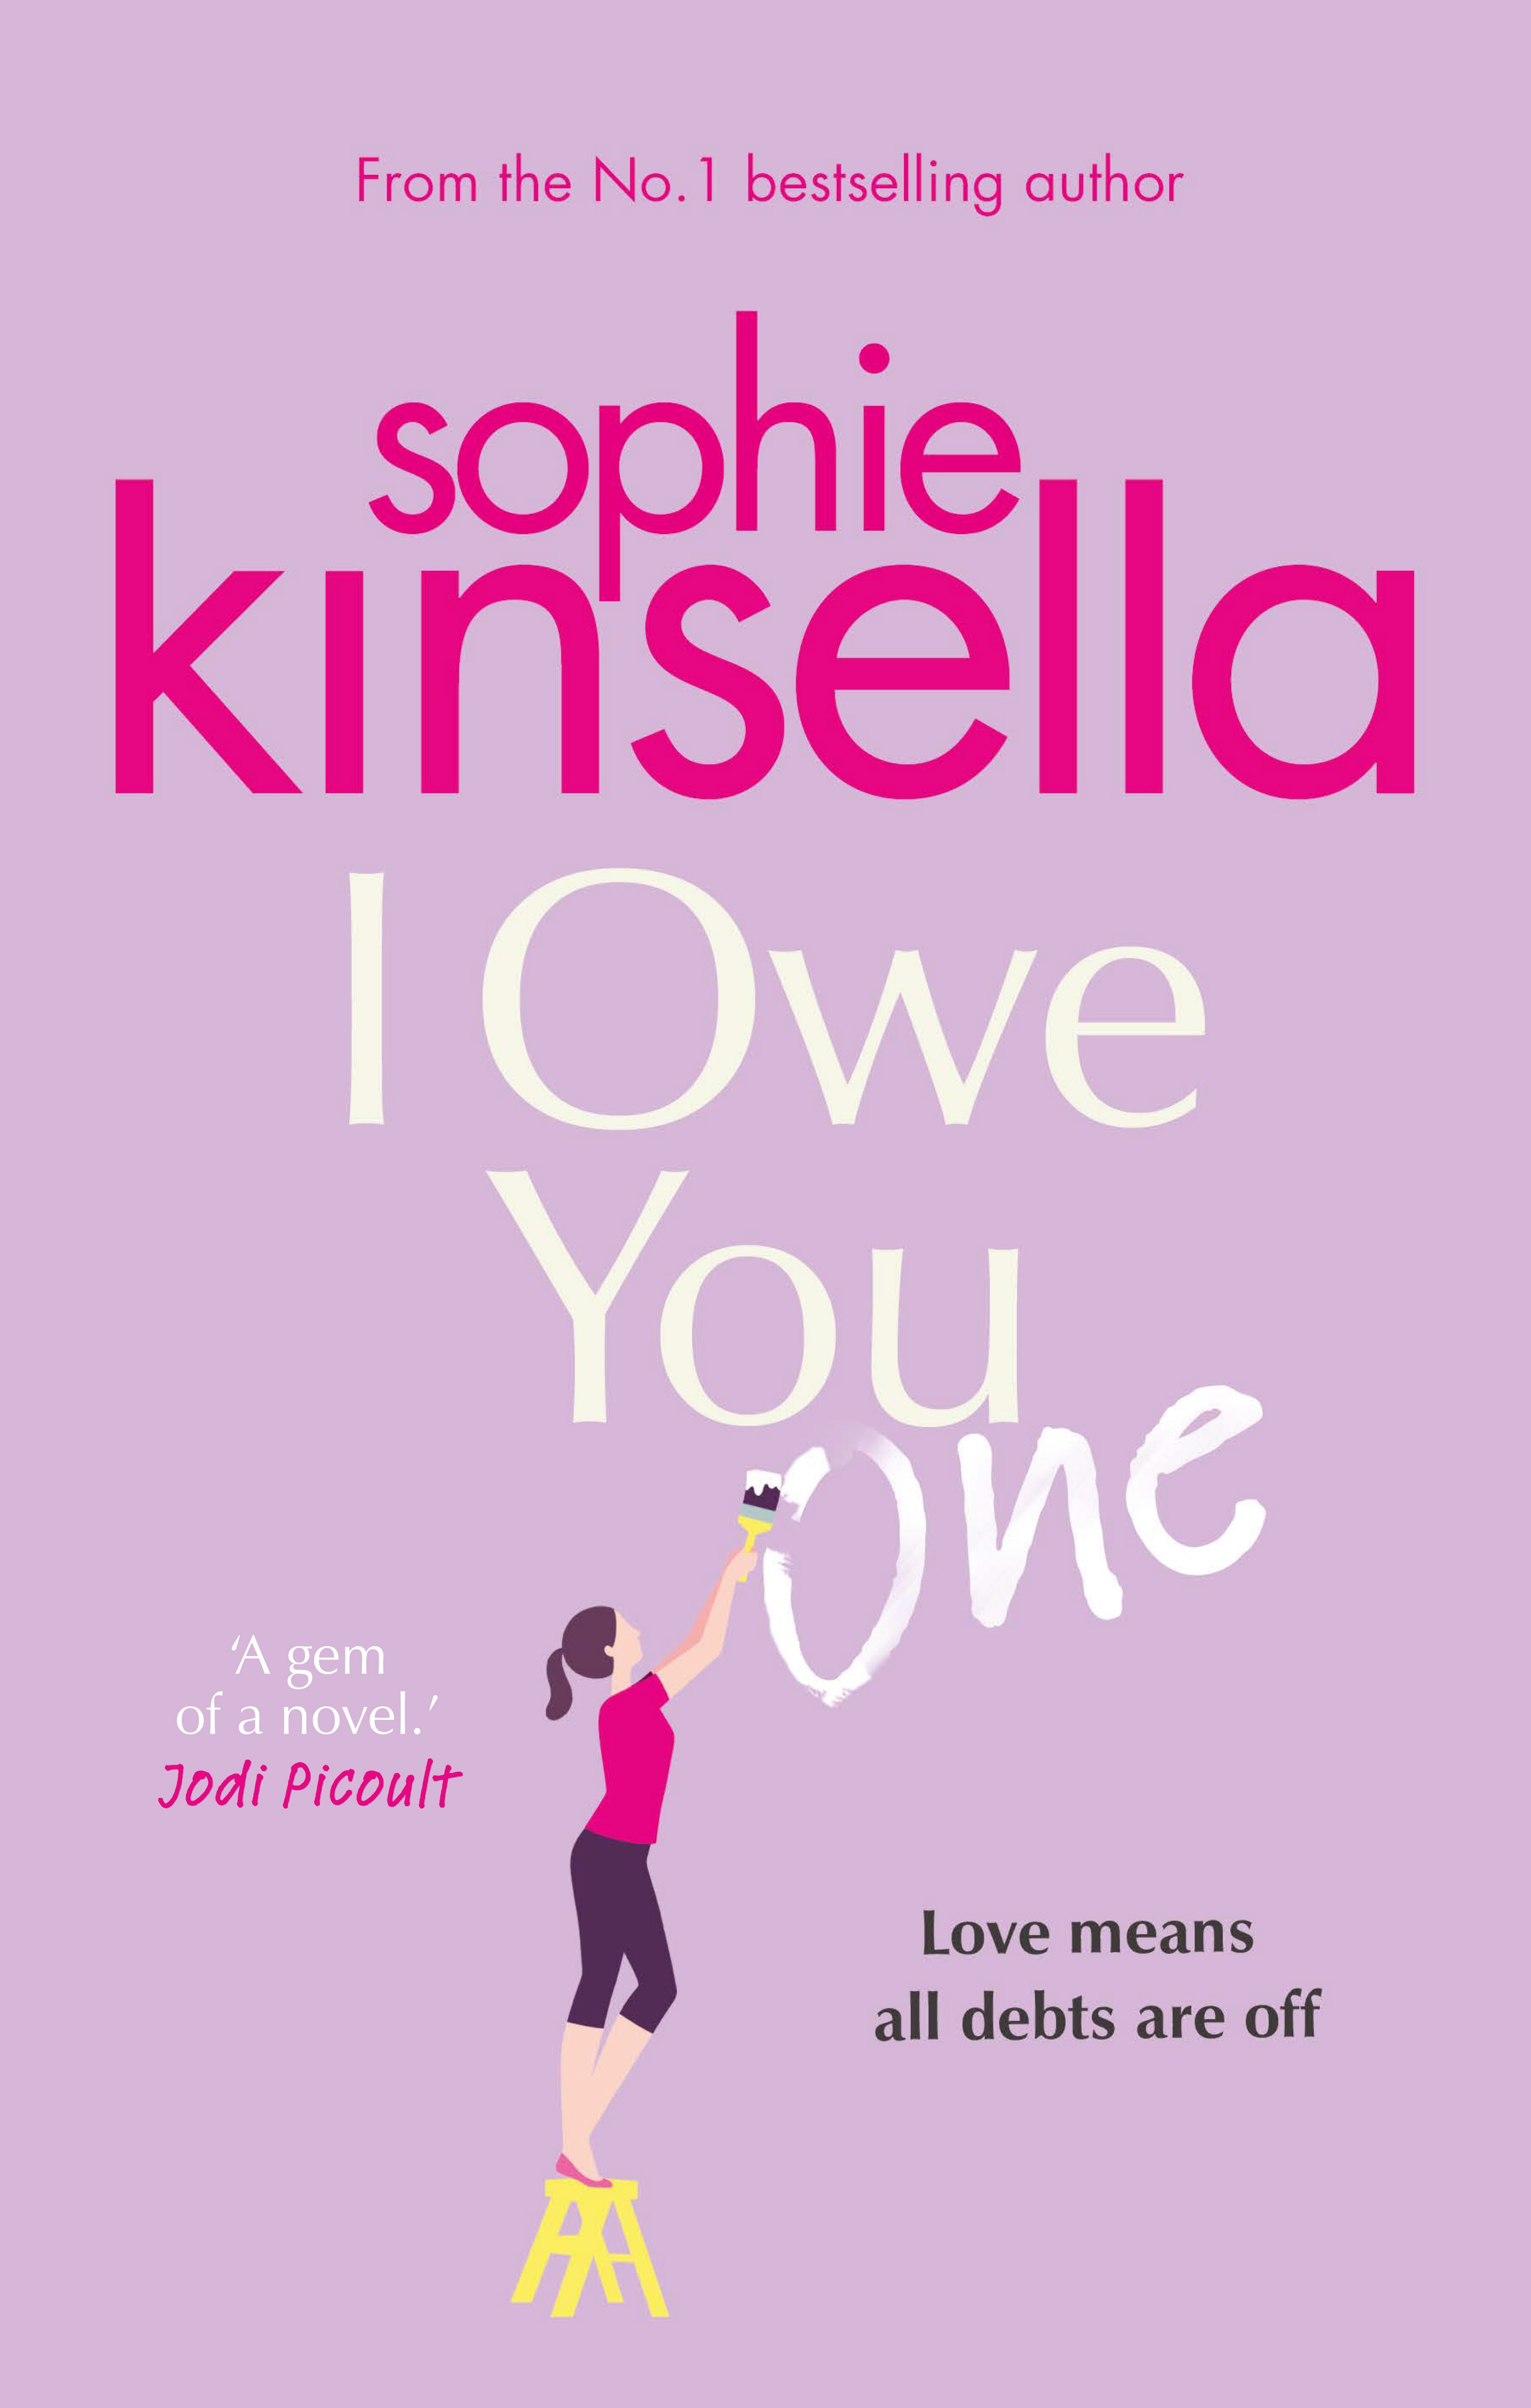 Book “I Owe You One” by Sophie Kinsella — February 7, 2019